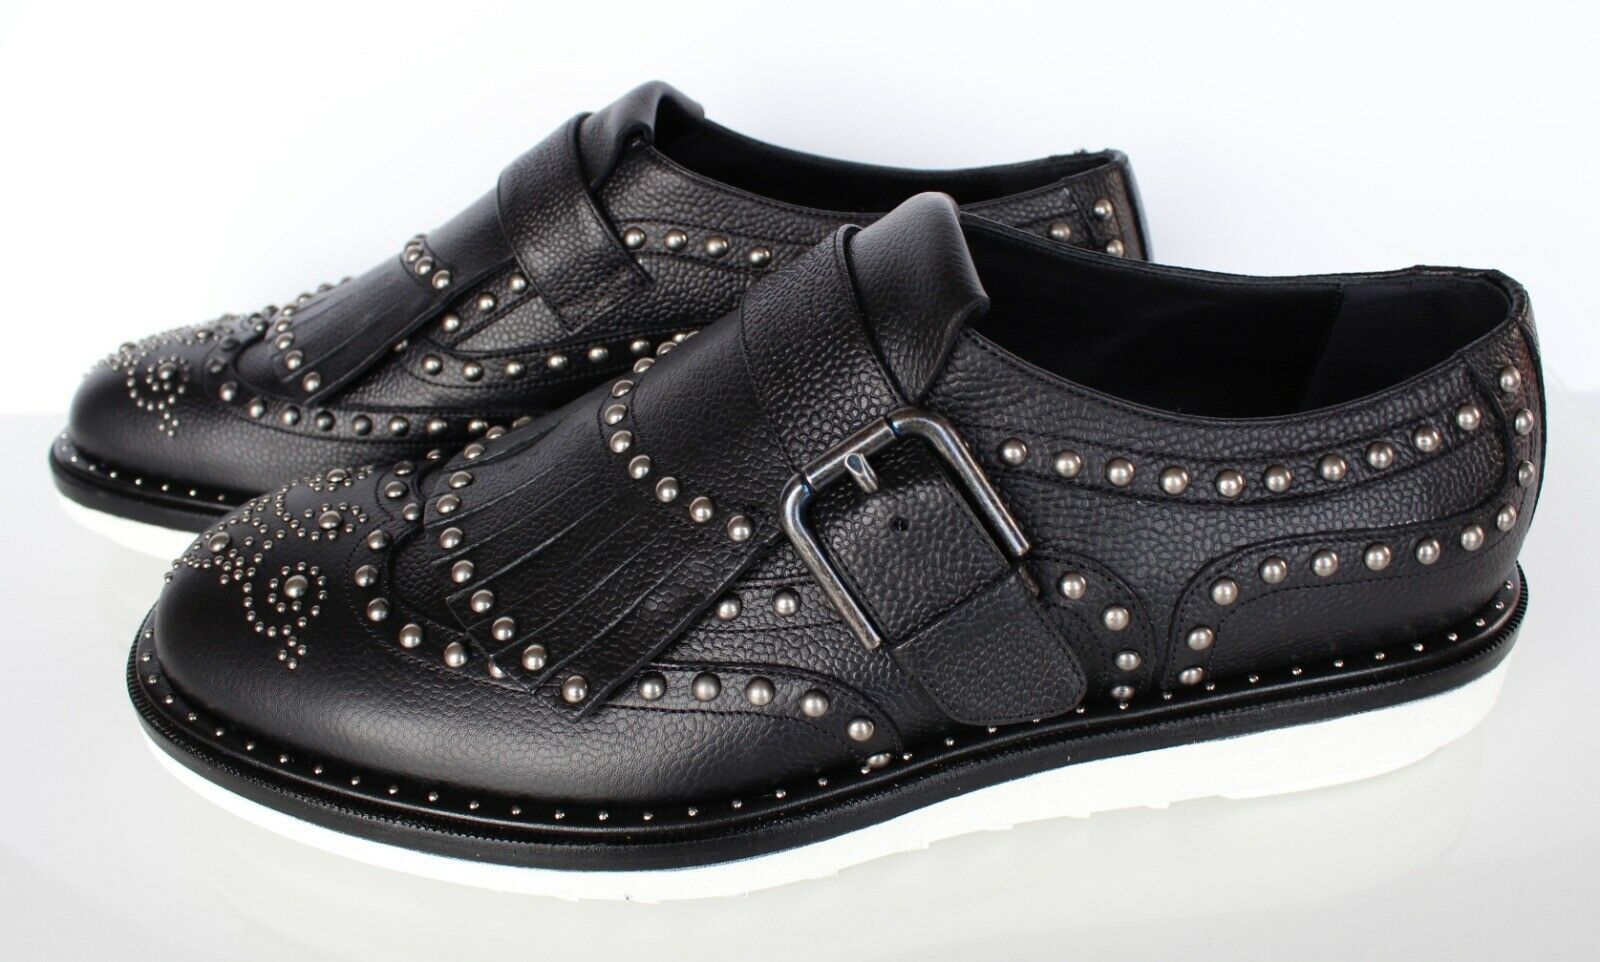 DOLCE & GABBANA Leather Studded Monk Strap Shoes Size 11US BNIB $1695 ITALY Made - $674.75